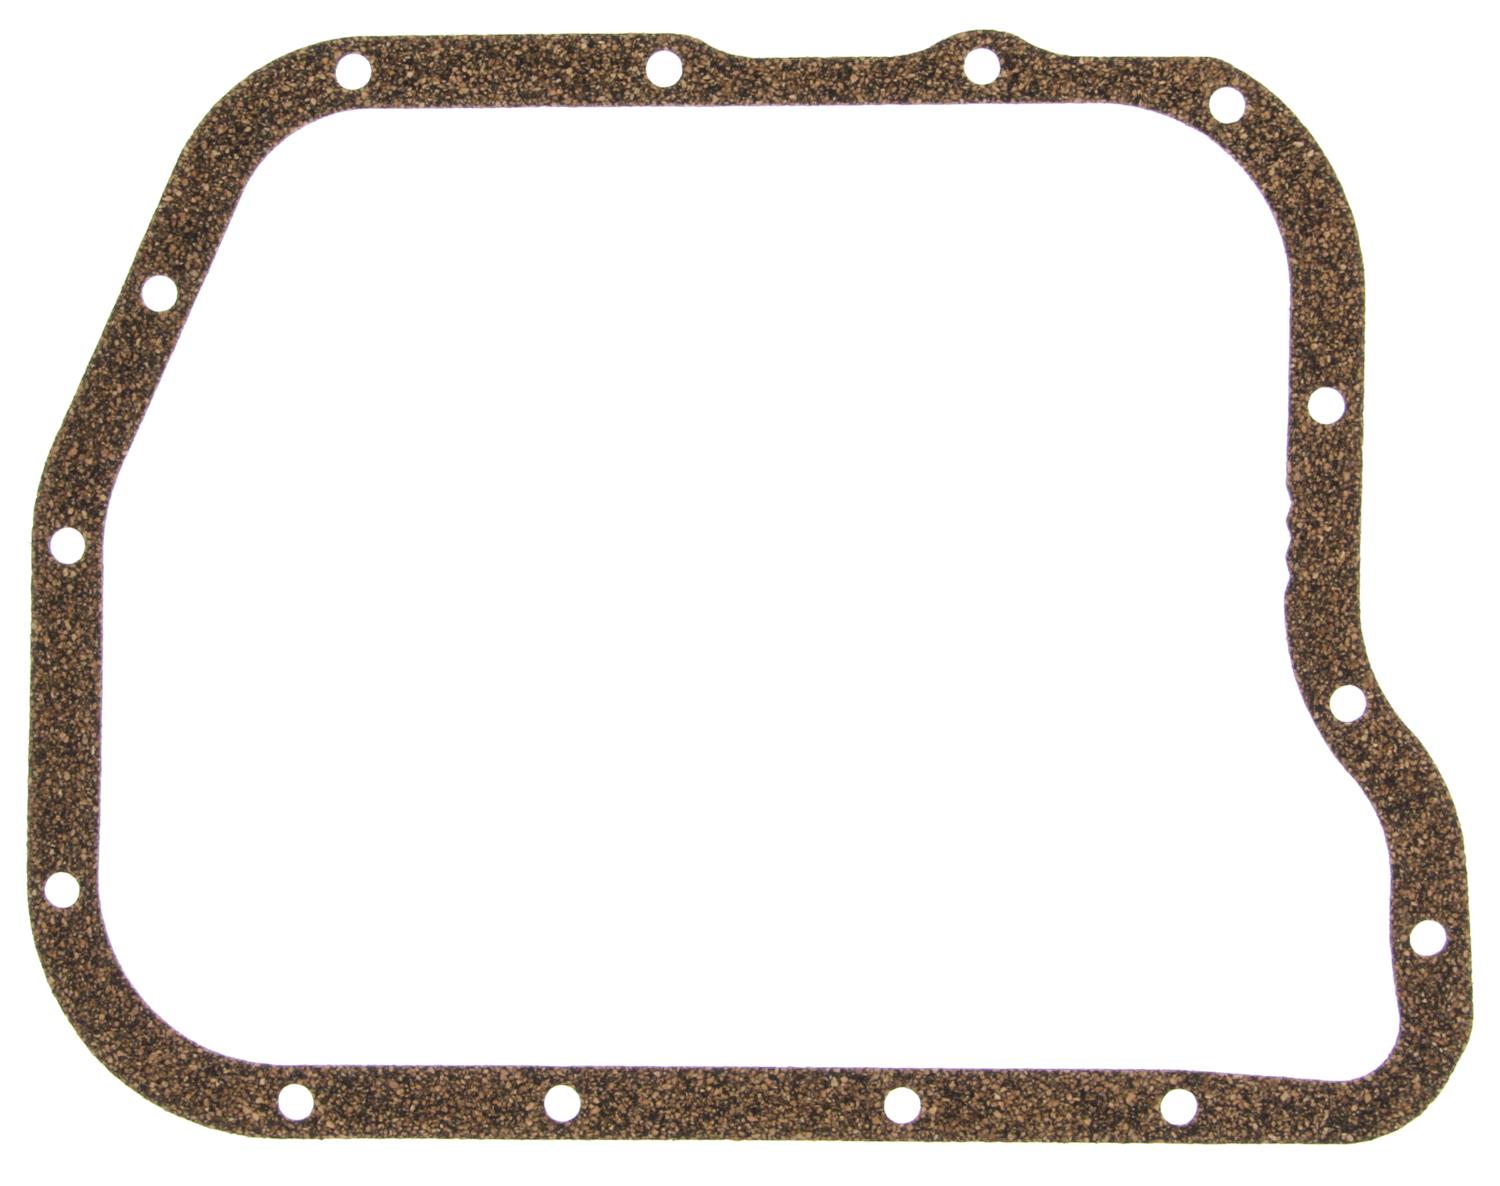 Mahle Automatic Transmission Oil Pan Gasket W39003 - image 2 of 2